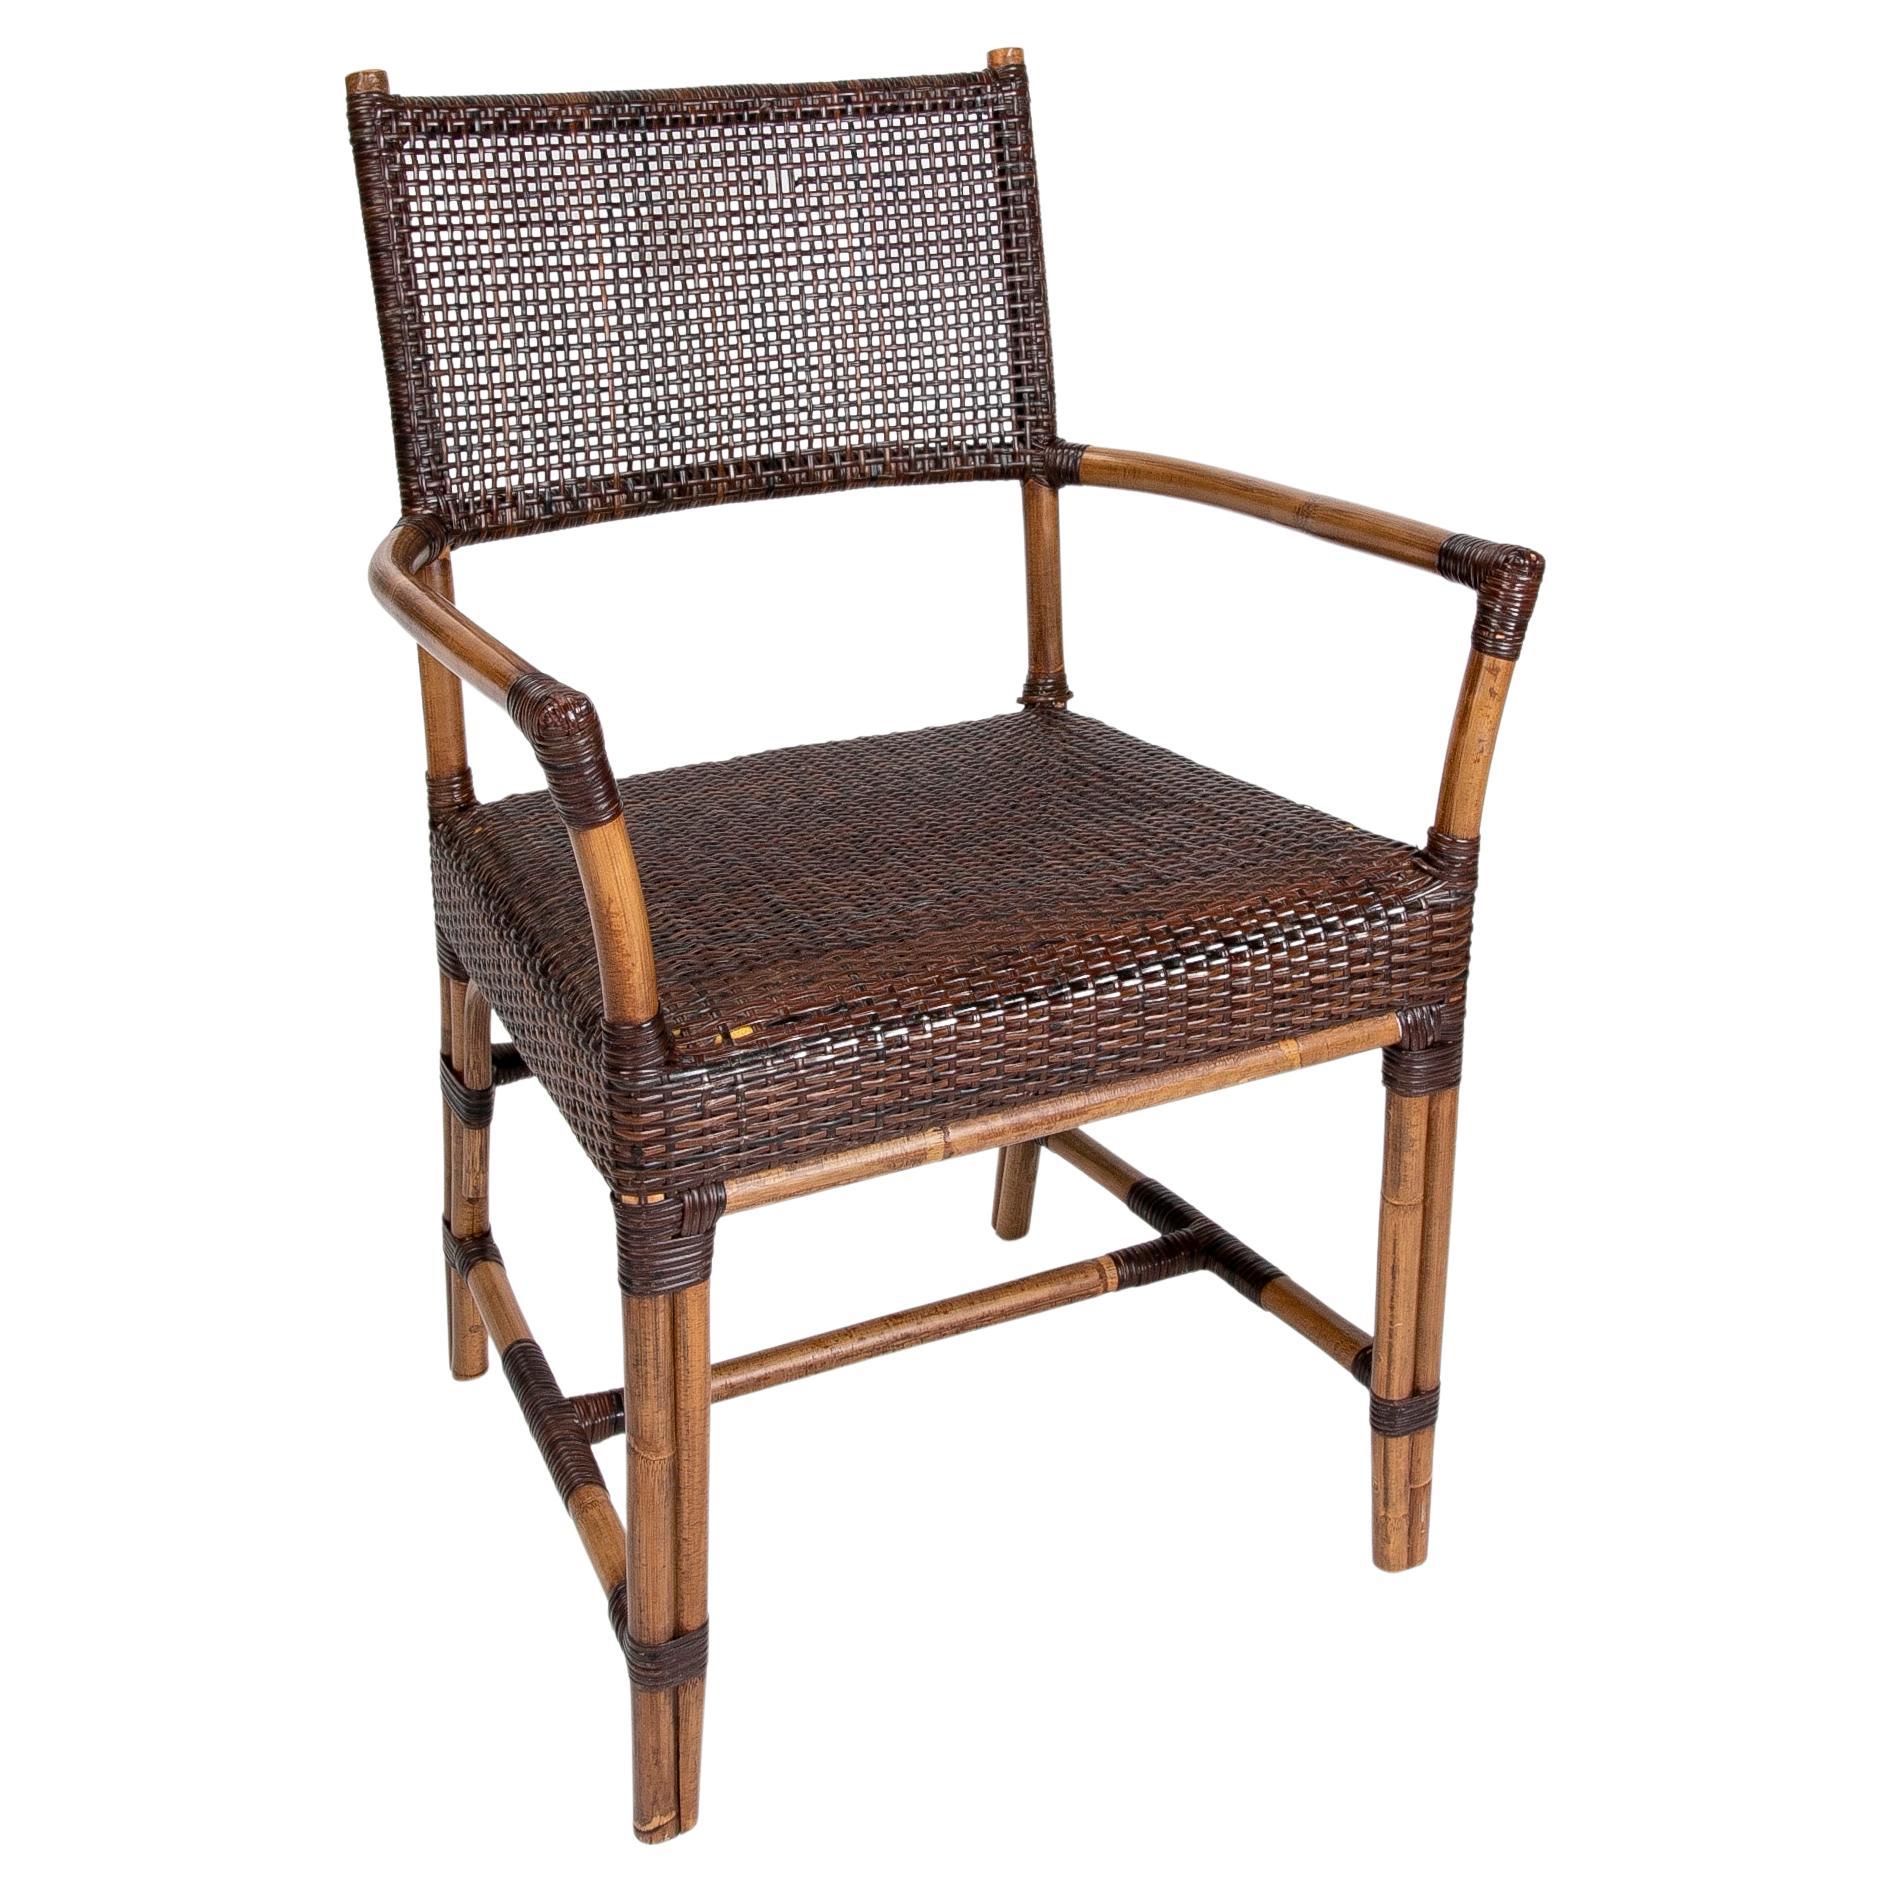 Bamboo and Wicker Chair with Armrests in Brown Tones 